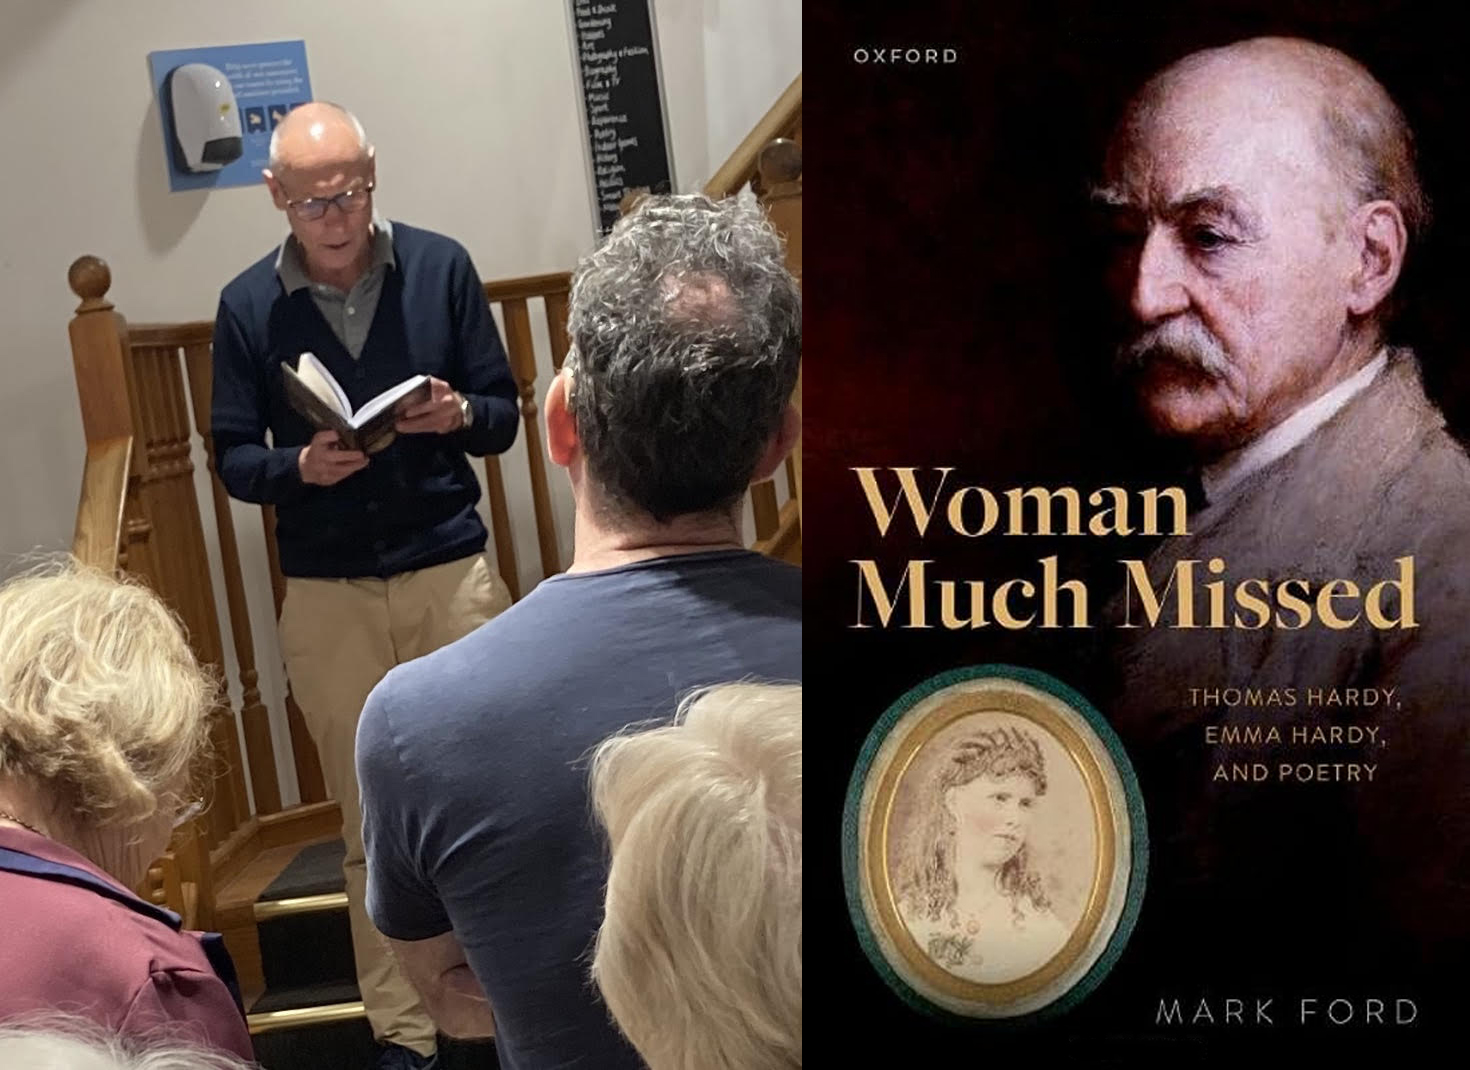 Woman Much Missed: Thomas Hardy, Emma Hardy, and Poetry' by Mark Ford